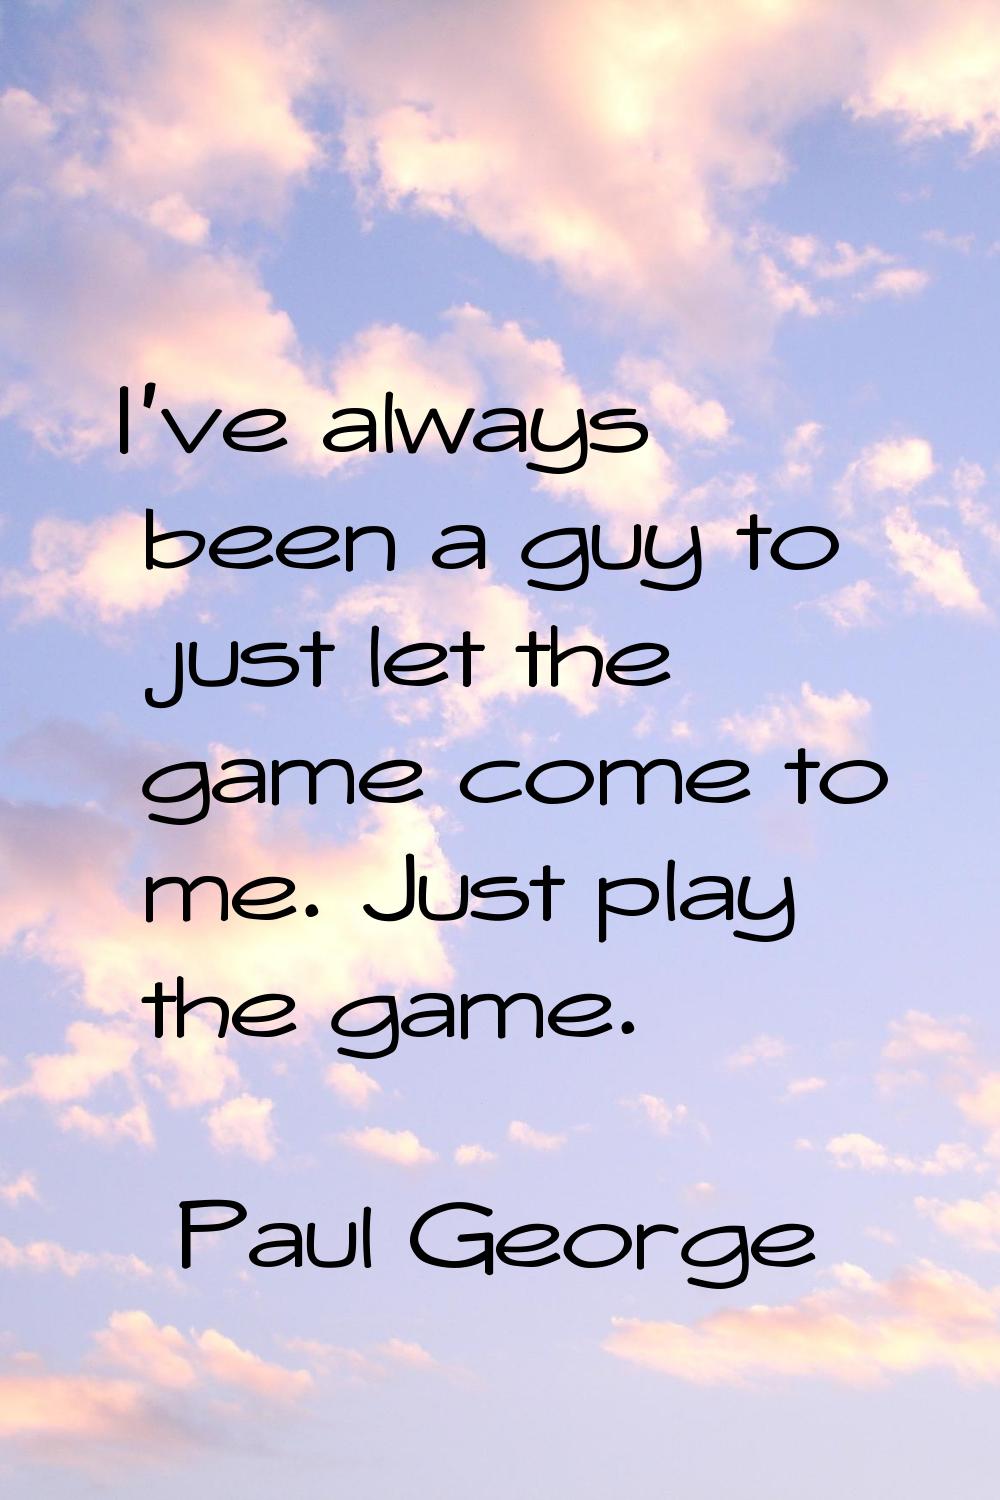 I've always been a guy to just let the game come to me. Just play the game.